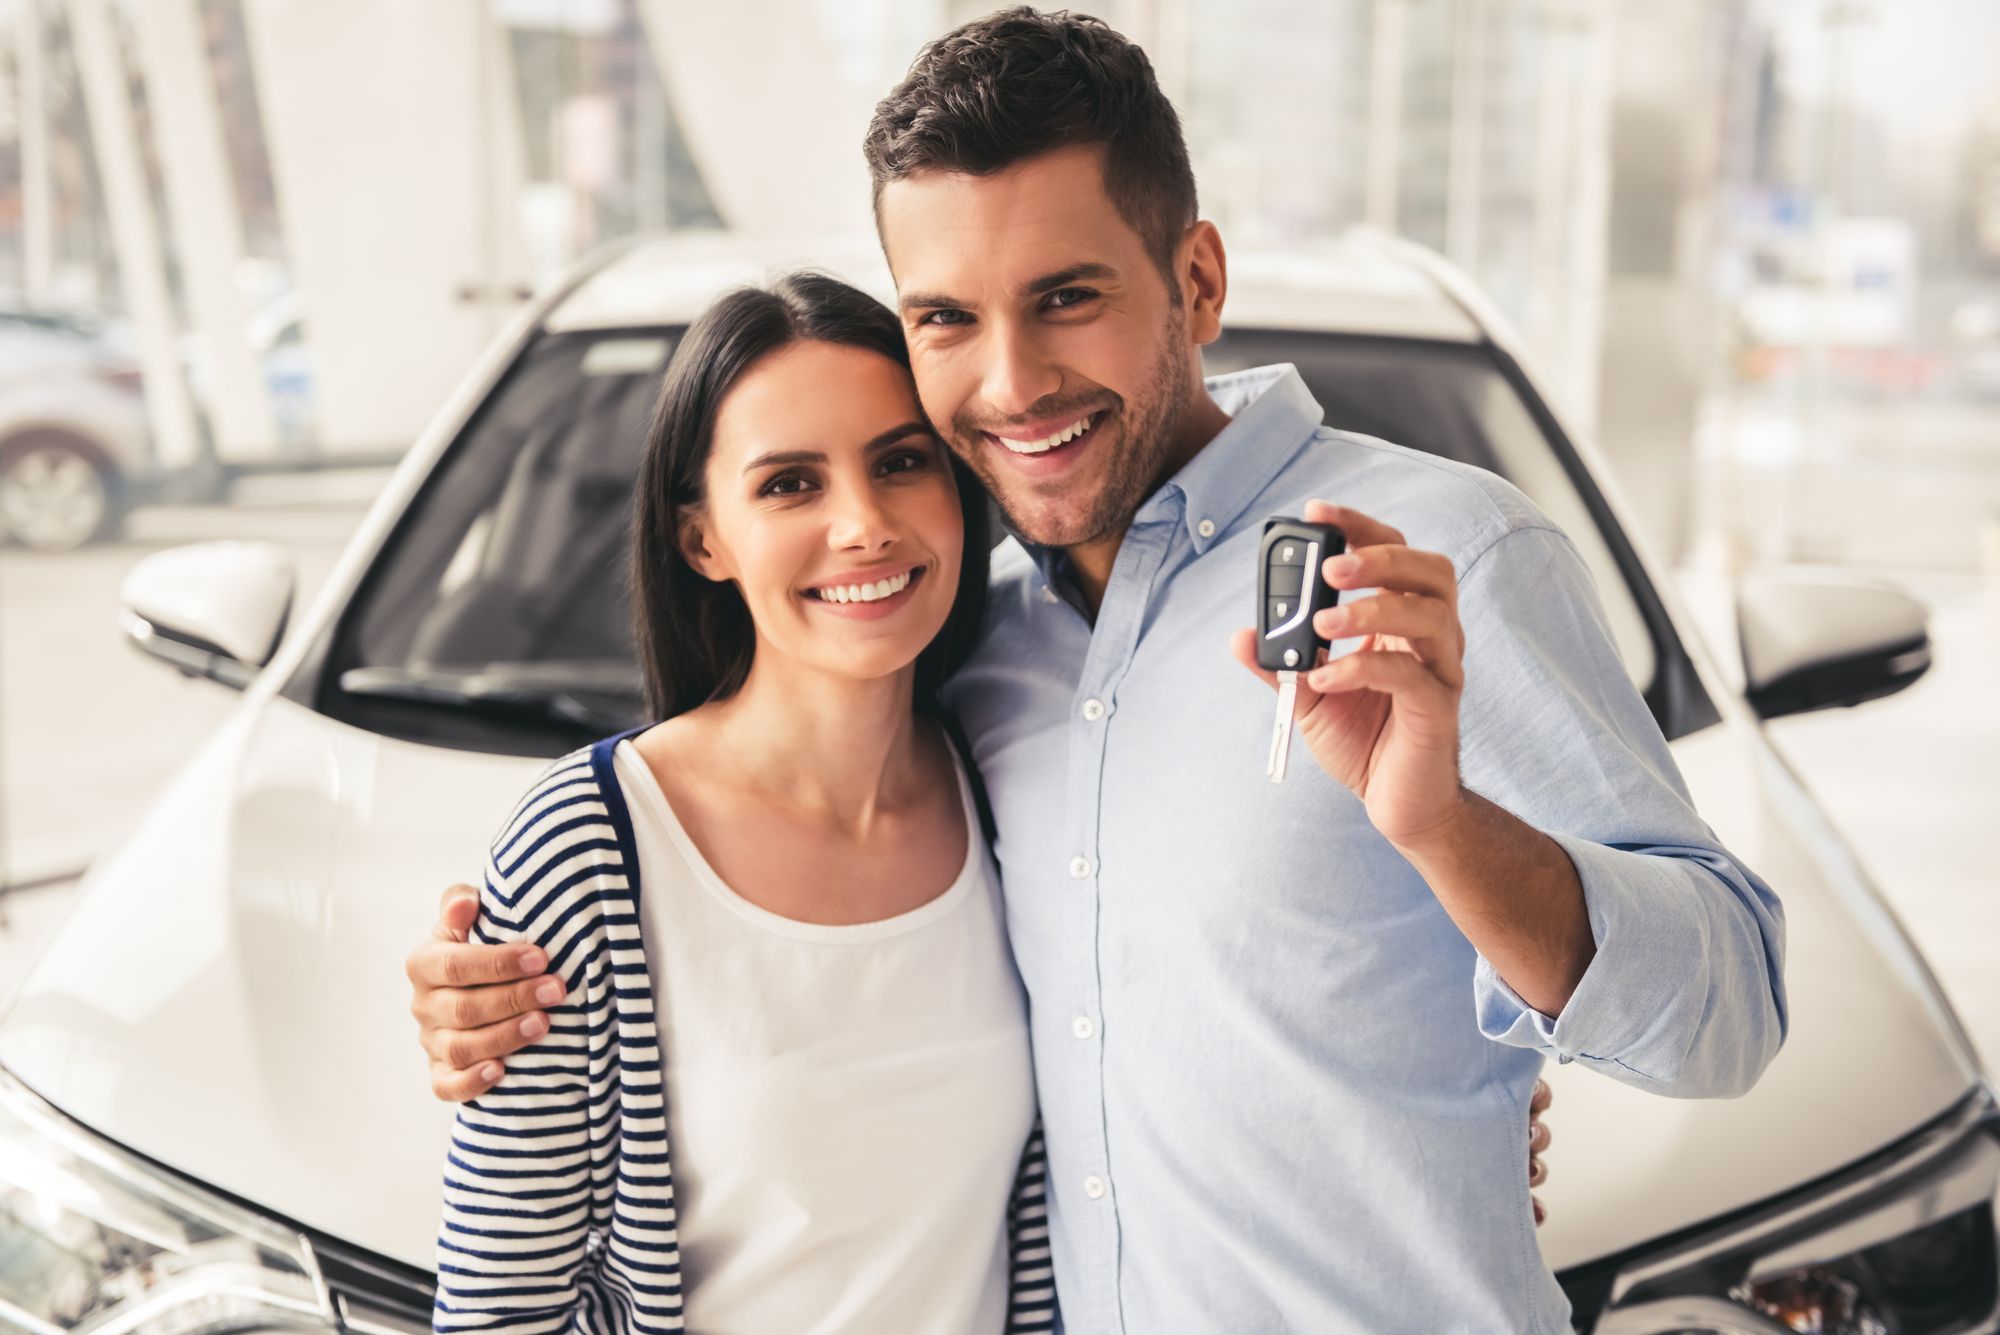 What You Need To Know About Financing a Car